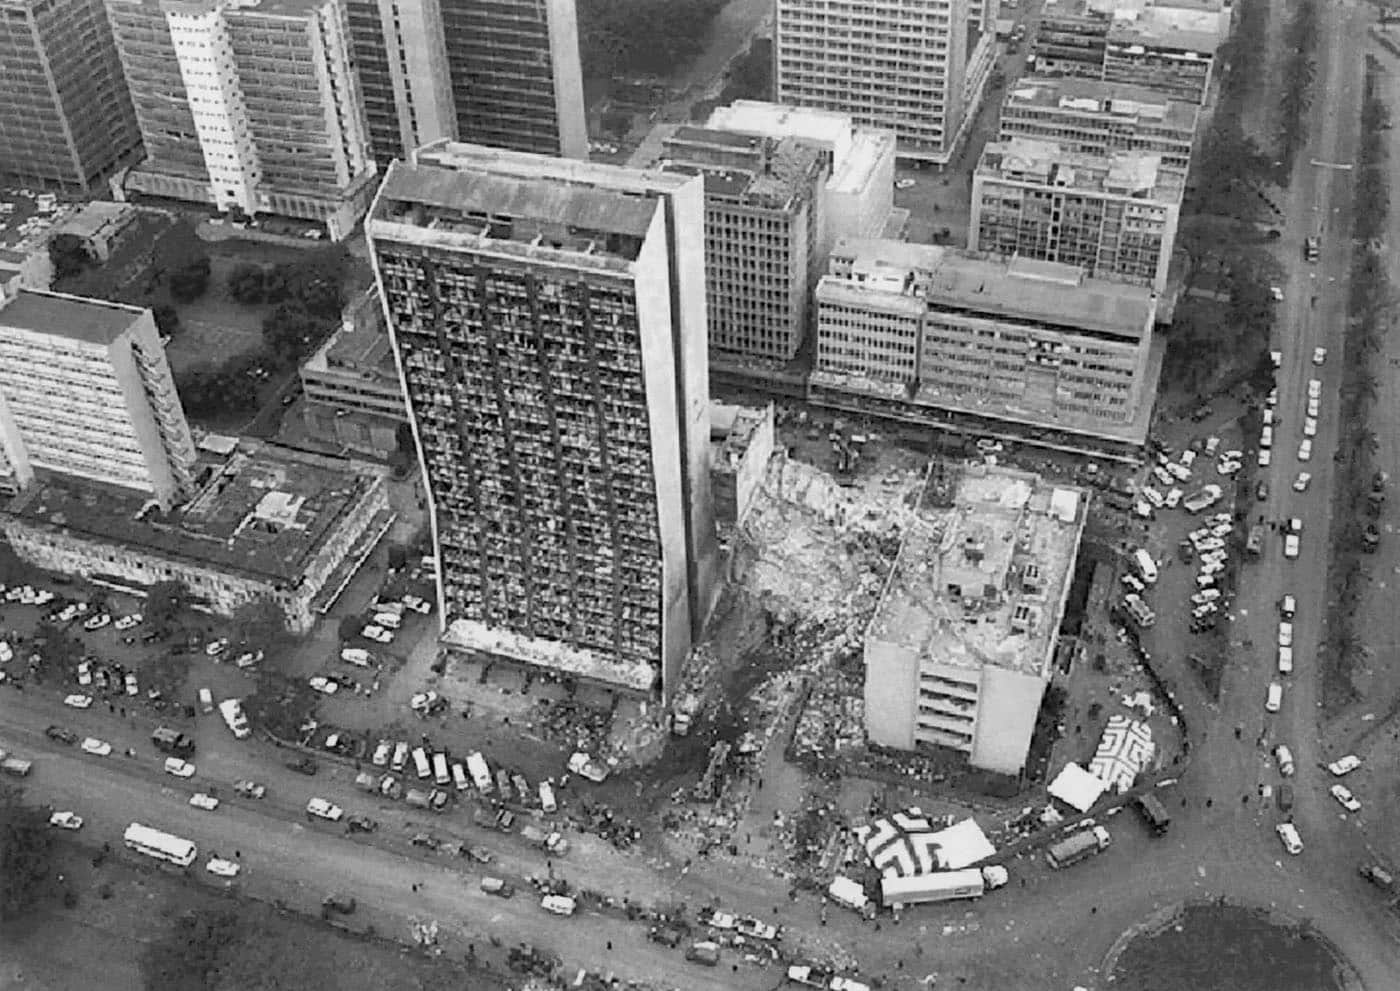 The bomb site of the attack on the U.S. Embassy in Nairobi, Africa on August 7, 1998